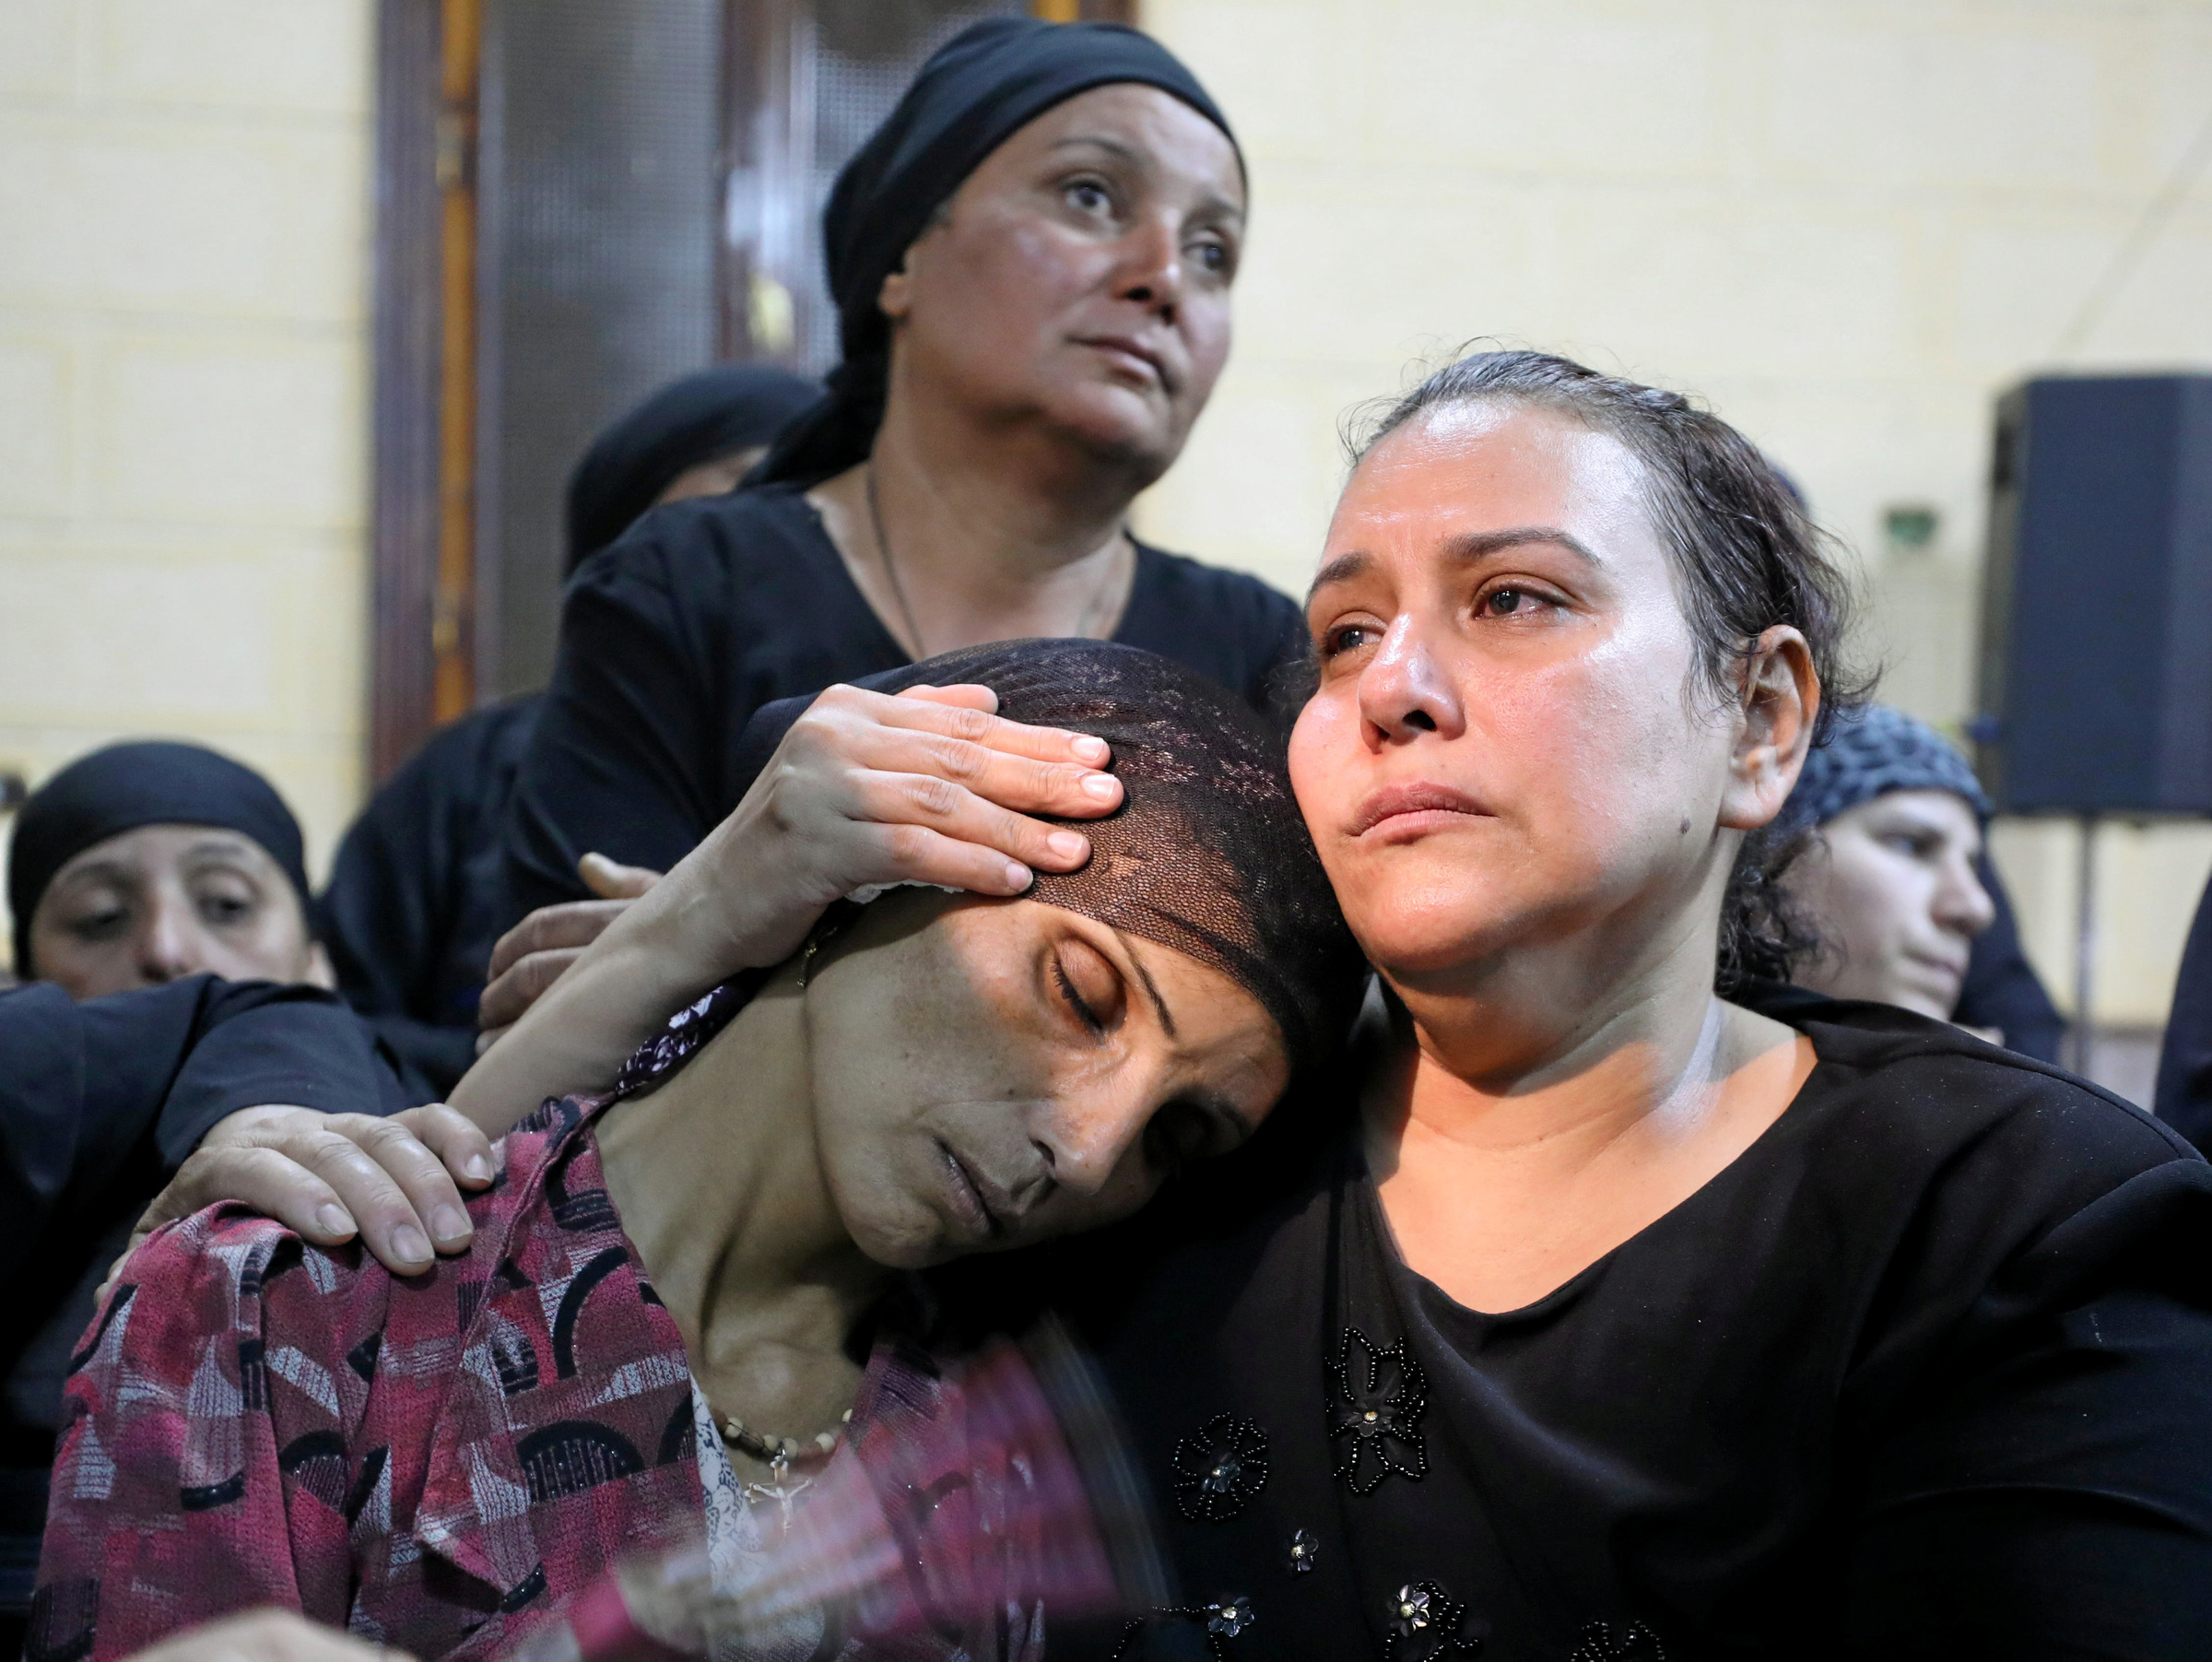 Priest says Egypt’s Christians feel they could be martyrs at any time